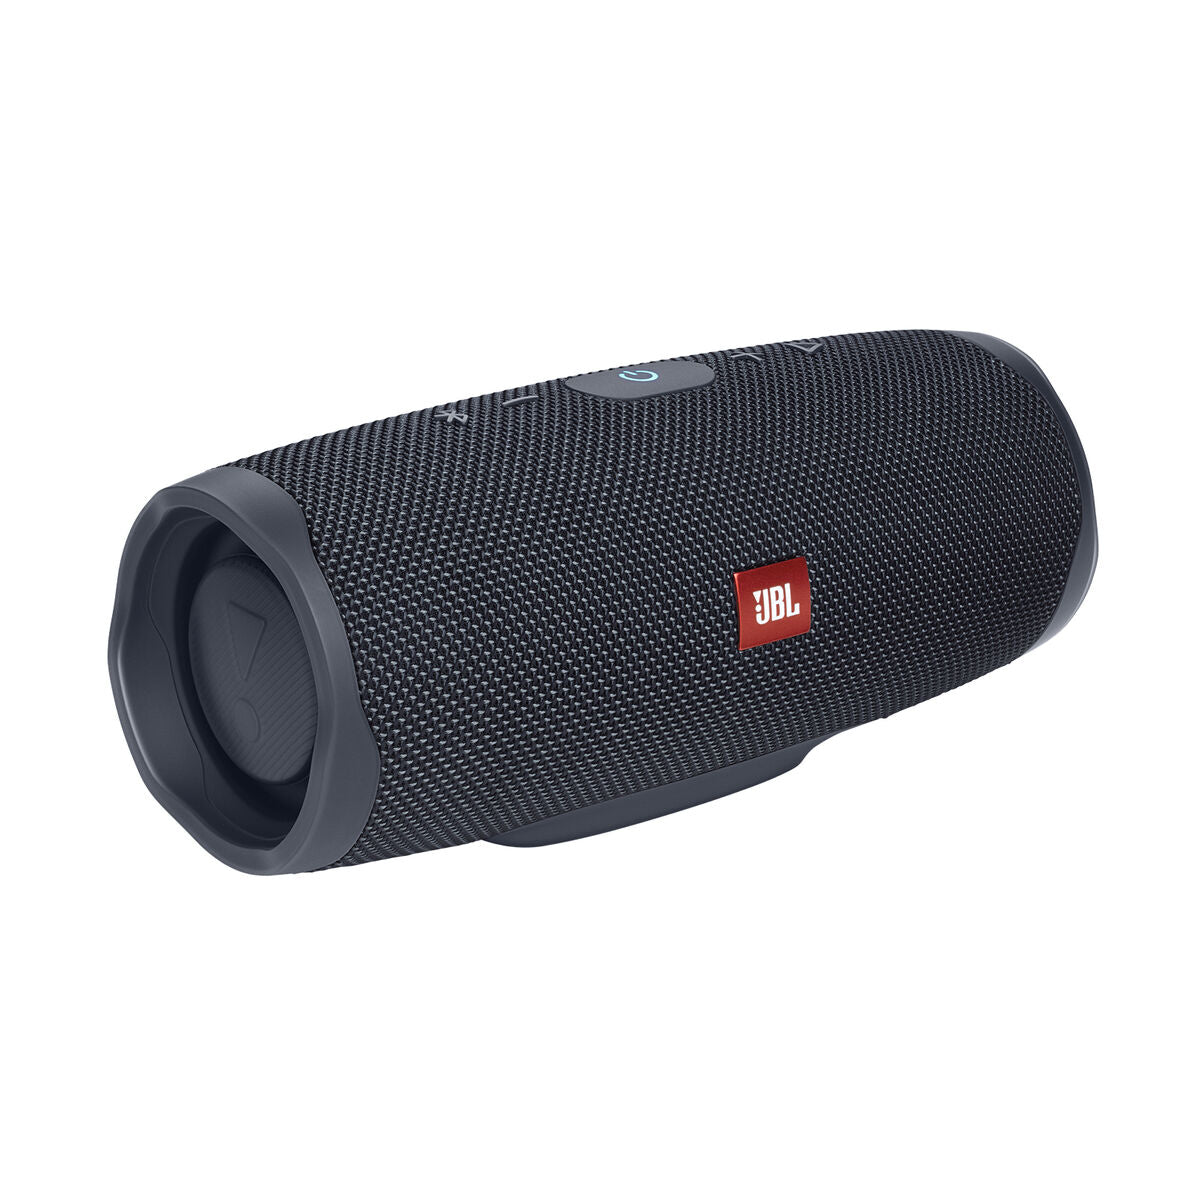 Bluetooth Speakers JBL JBLCHARGEES2 40 W Black, JBL, Electronics, Mobile communication and accessories, bluetooth-speakers-jbl-jblchargees2-40-w-black, Brand_JBL, category-reference-2609, category-reference-2882, category-reference-2923, category-reference-t-19653, category-reference-t-21311, category-reference-t-25527, category-reference-t-4036, category-reference-t-4037, Condition_NEW, entertainment, music, Price_100 - 200, telephones & tablets, wifi y bluetooth, RiotNook